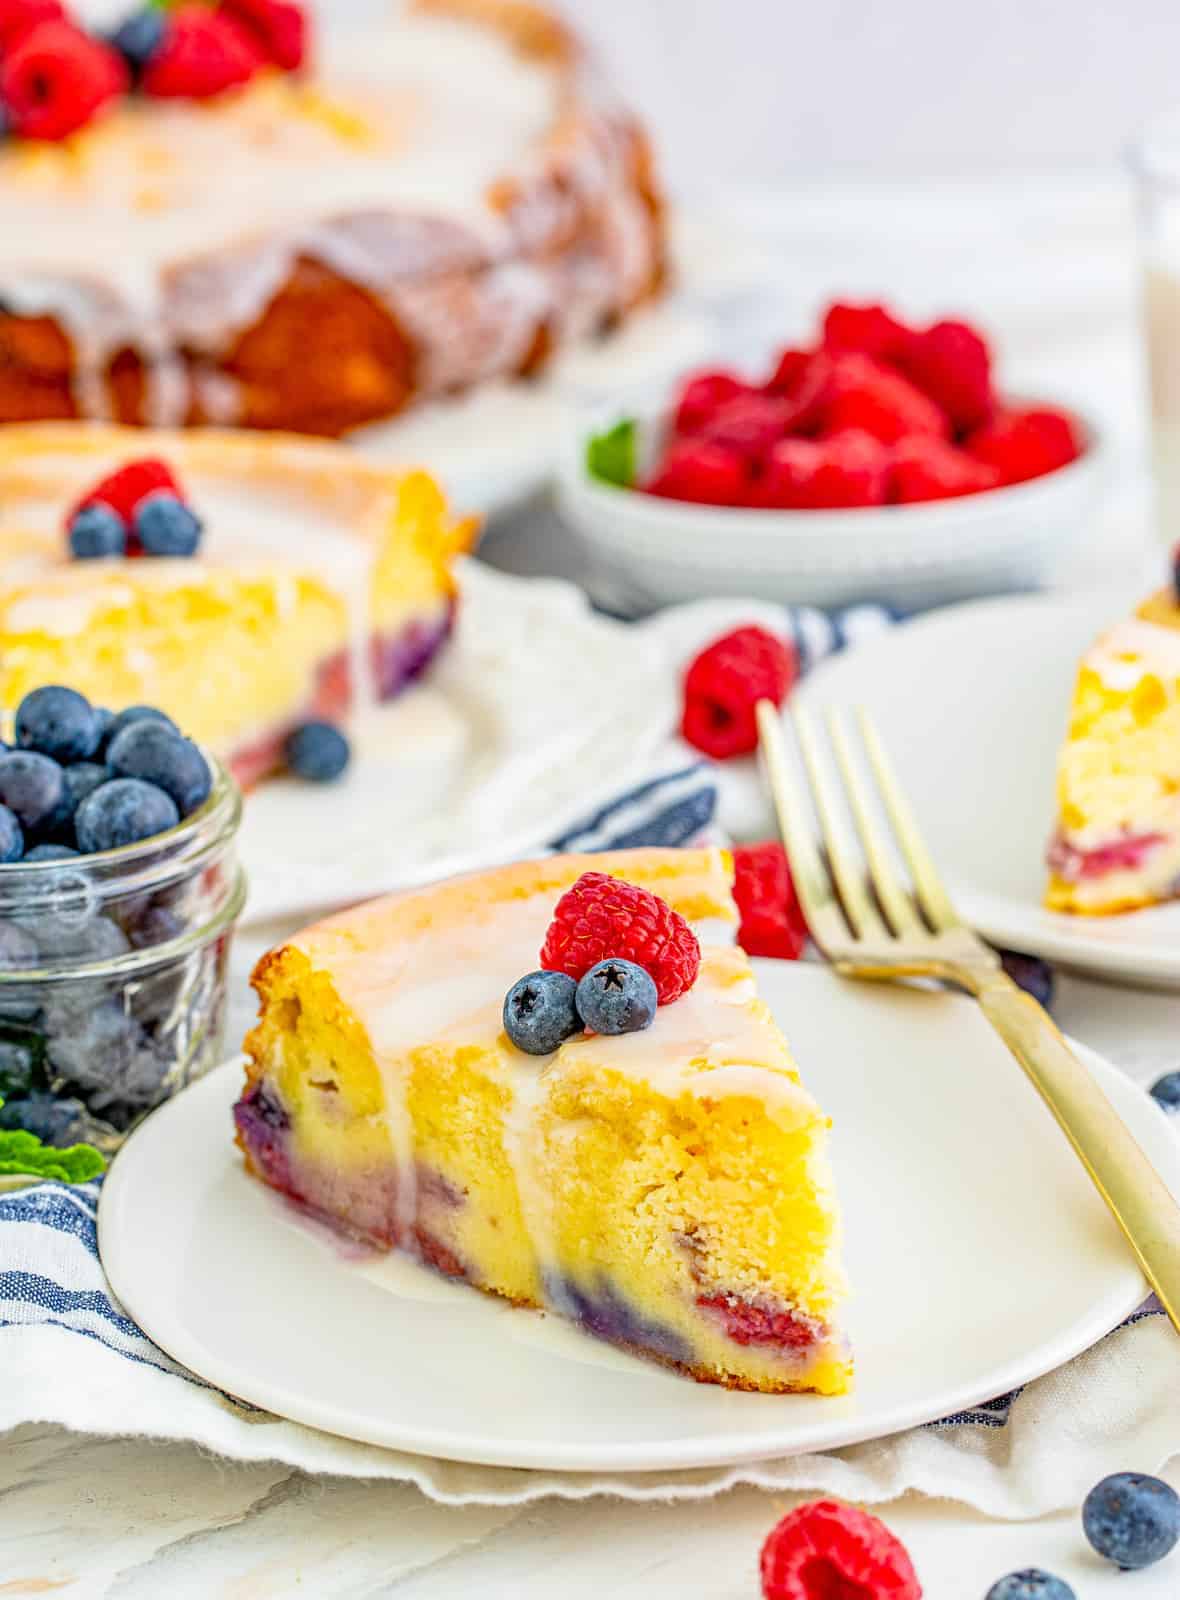 Ricotta cake topped with fresh berries.